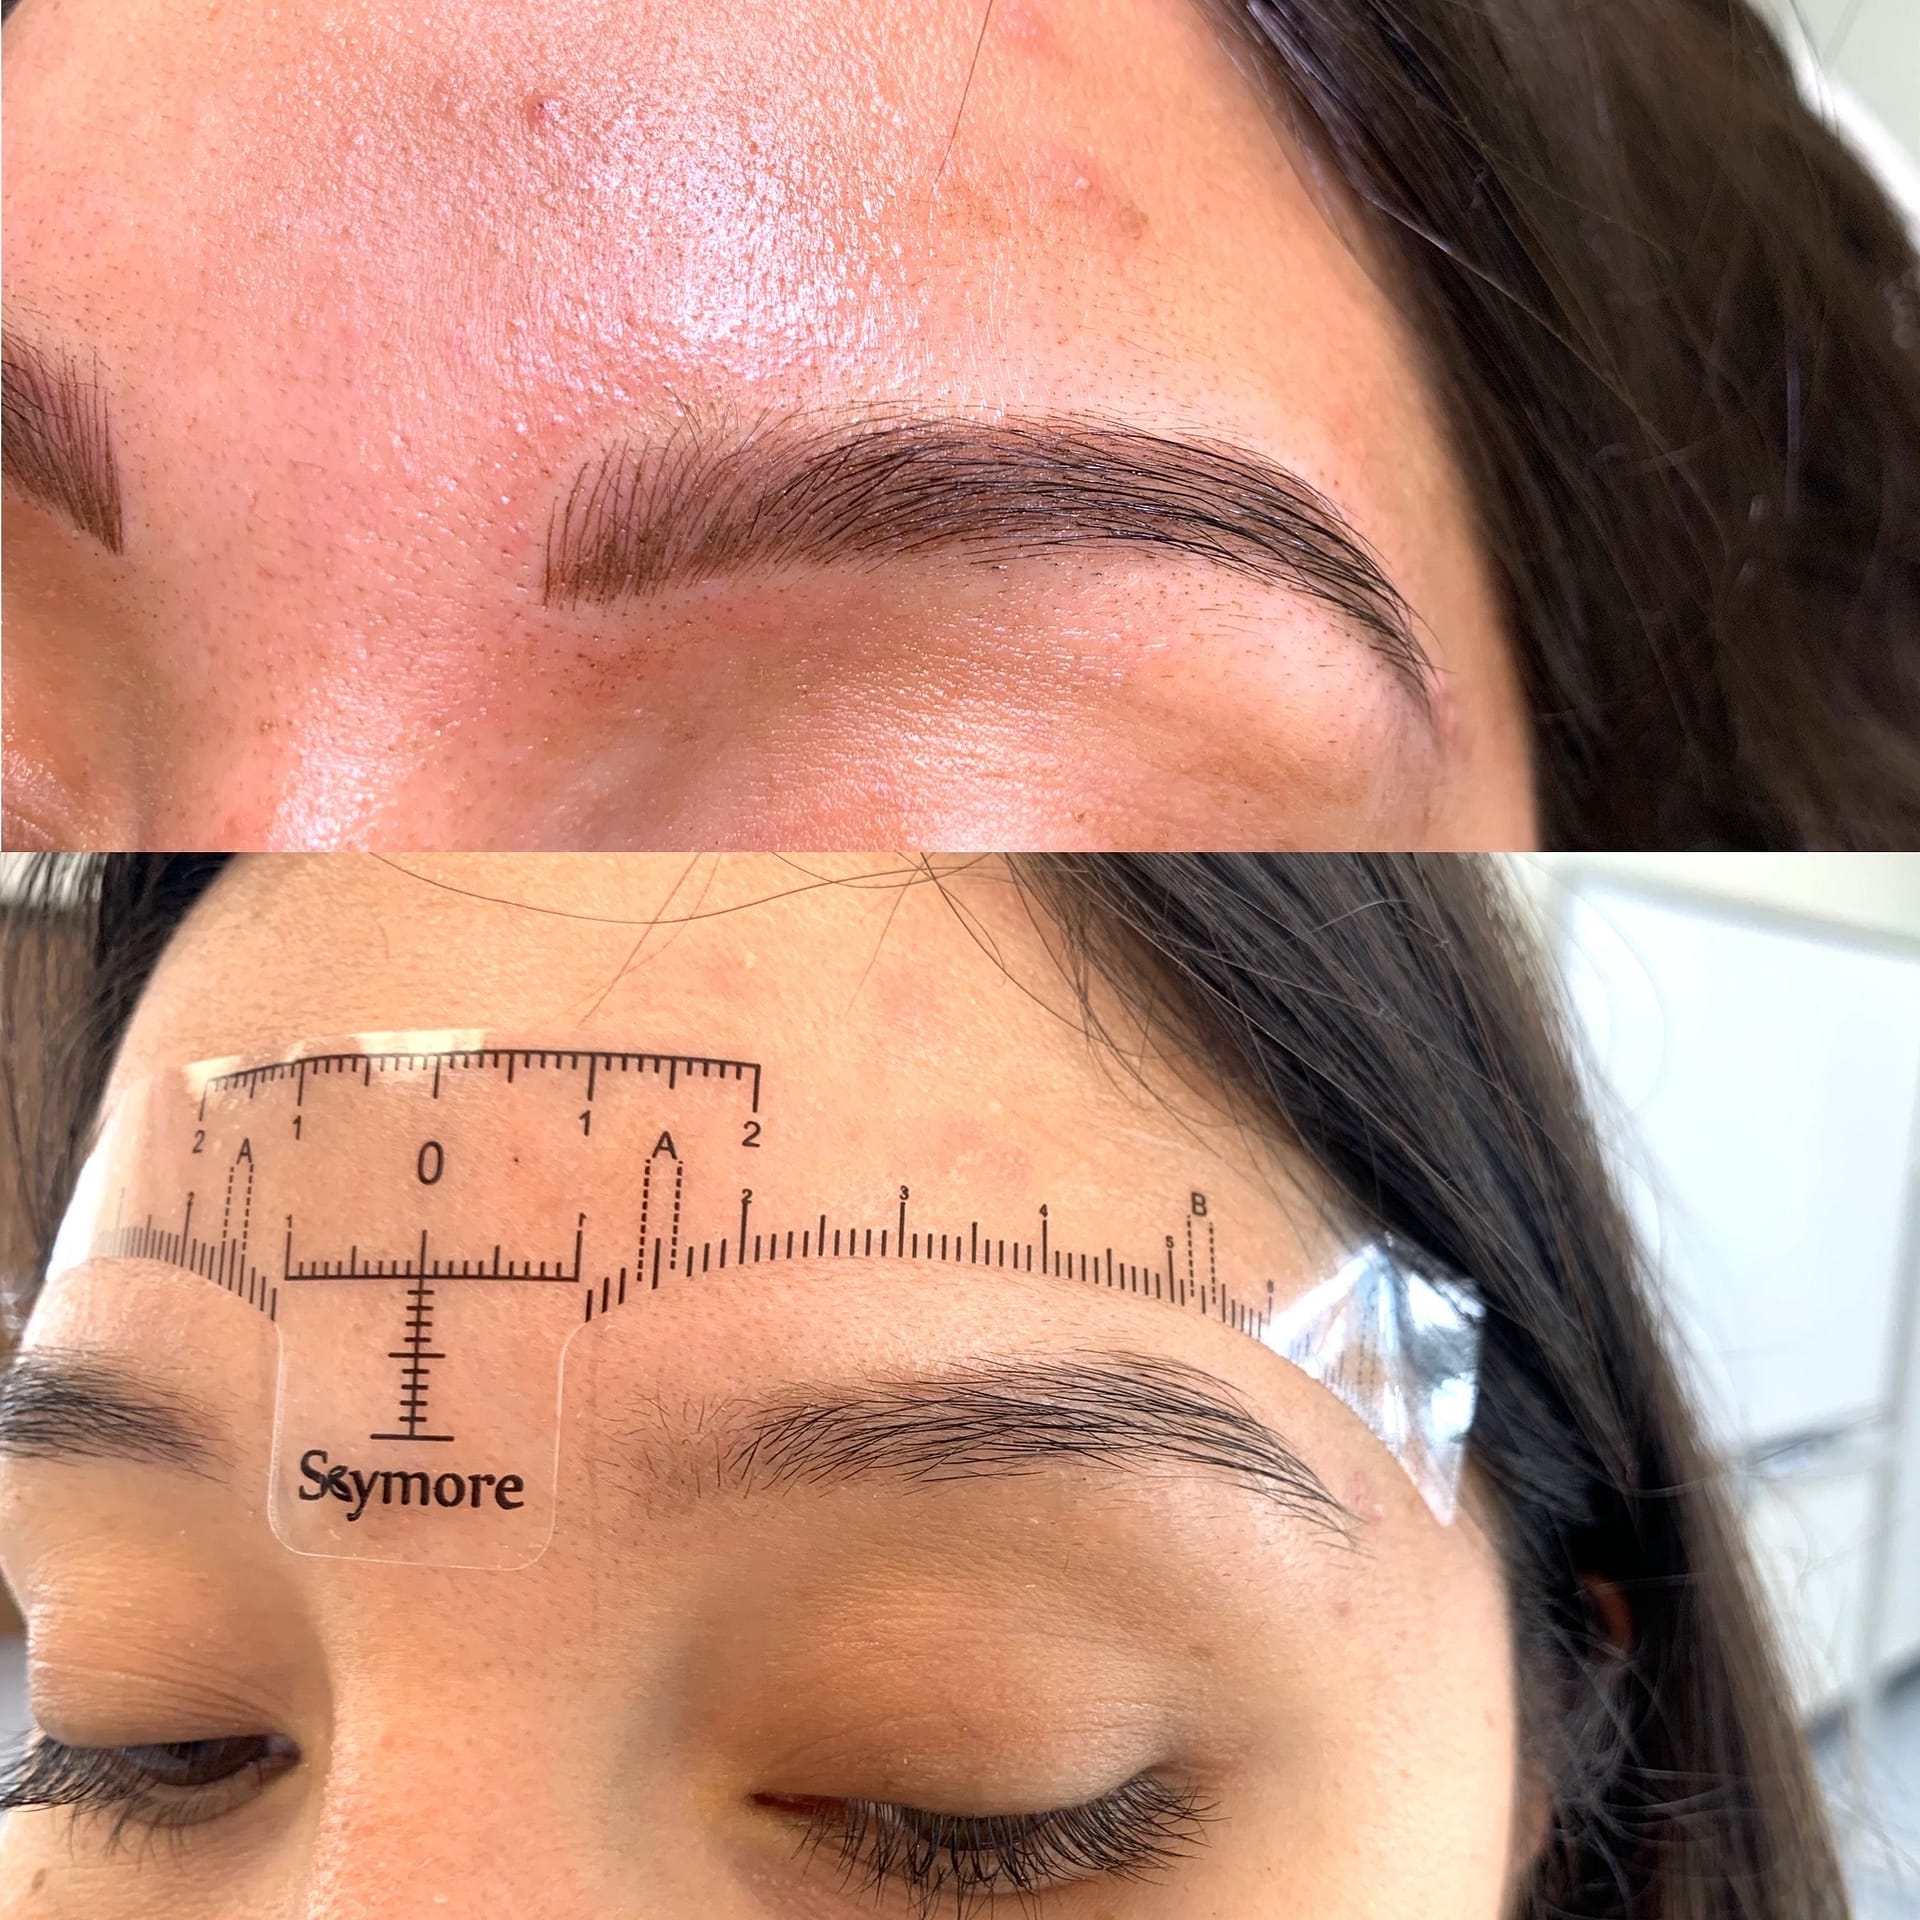 Beauty and definition for the girlies that want to shave 10-15 minutes off of their makeup routine ✨⁣
⁣
MICROBLADING⁣
▫️Last 1-3 years⁣
▫️Smudge proof, waterproof, and sweat proof⁣
▫️Pain tolerance: Minimal to no pain⁣
▫️Brows will lighten about 20-40% after procedure⁣
▫️Touch up is highly recommended after 6-8 weeks of initial procedure⁣
⁣
PRICES⁣
▫️Brows $450-$650: includes complementary touchup within 6 weeks⁣
▫️Touch up $275-$350 Within 1 year⁣
⁣
Did you know we also ​​offer training courses taught by our elite certified instructors and working microblading artists at our studio? Text or call (949)317-0464.⁣
⁣
#microblading #pmutraining #microbladingtraining